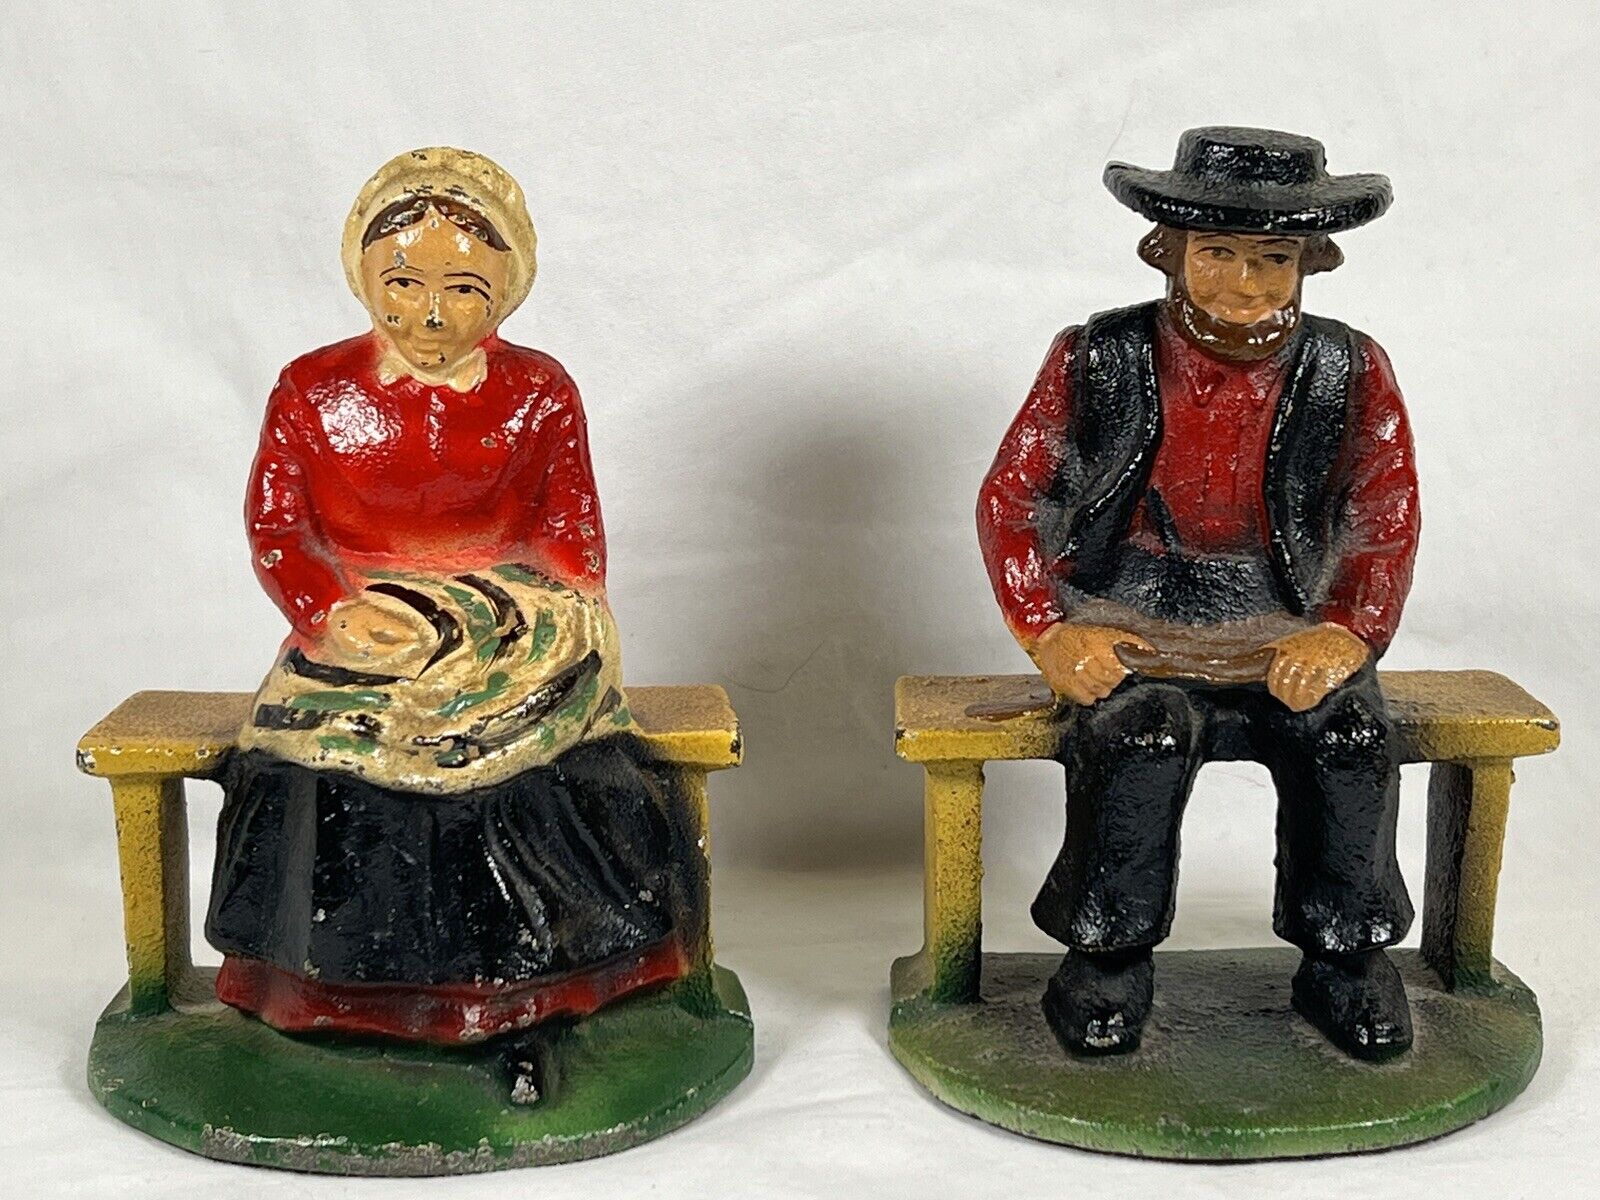 VTG CAST IRON BOOKENDS AMISH  MAN & WOMAN SITTING ON BENCH DOOR STOPS Heavy